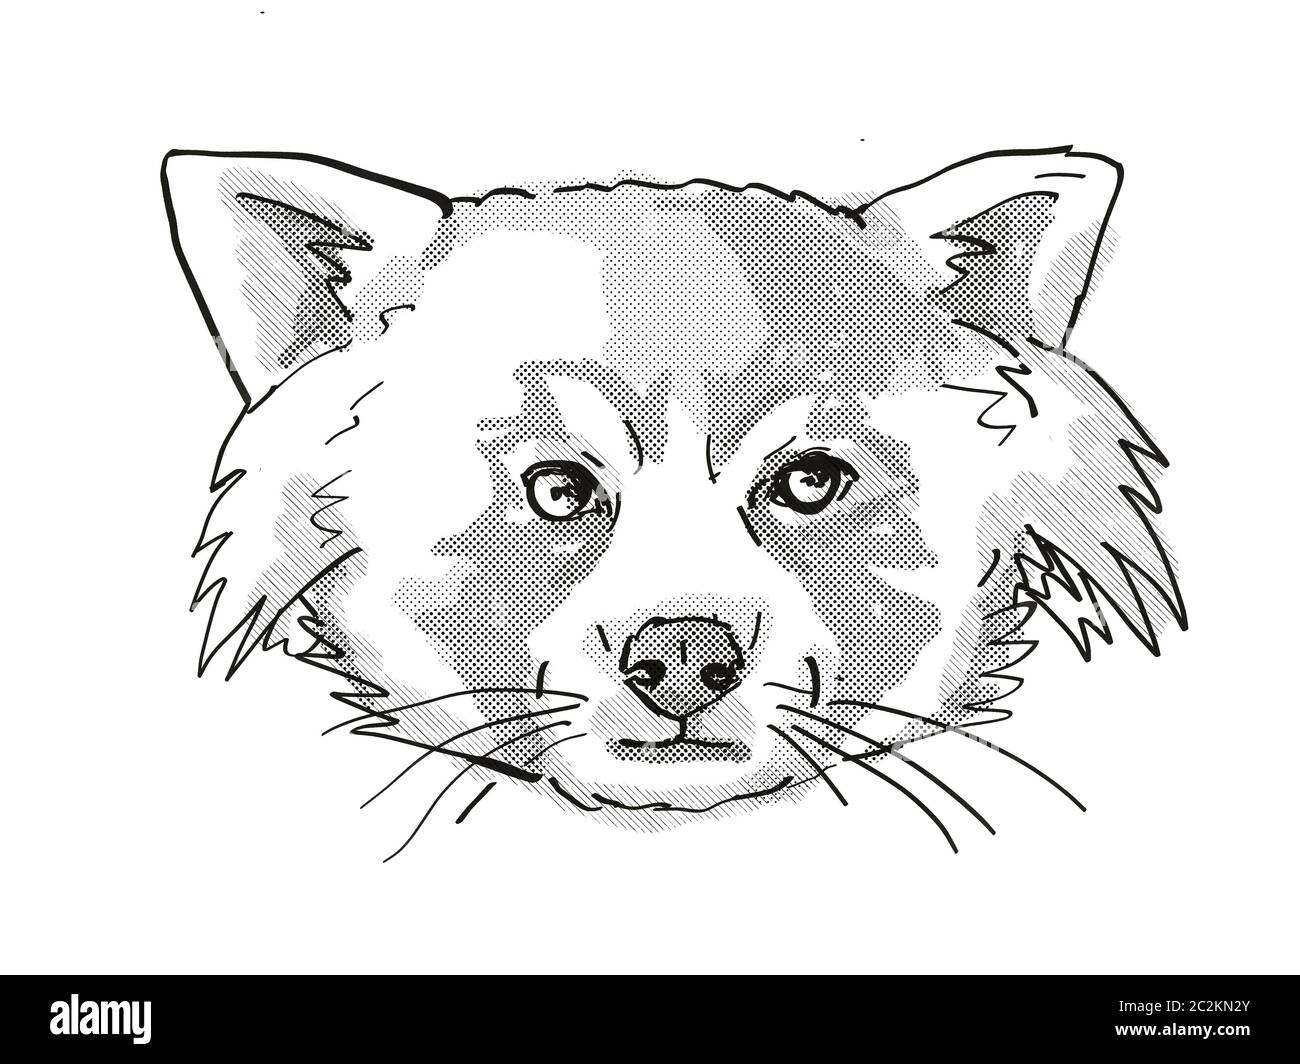 Retro Cartoon Style Drawing Of Head Of A Red Panda A Cat Sized Species Of Carnivorous Mammal And An Endangered Wildlife Species On Isolated White Bac Stock Photo Alamy